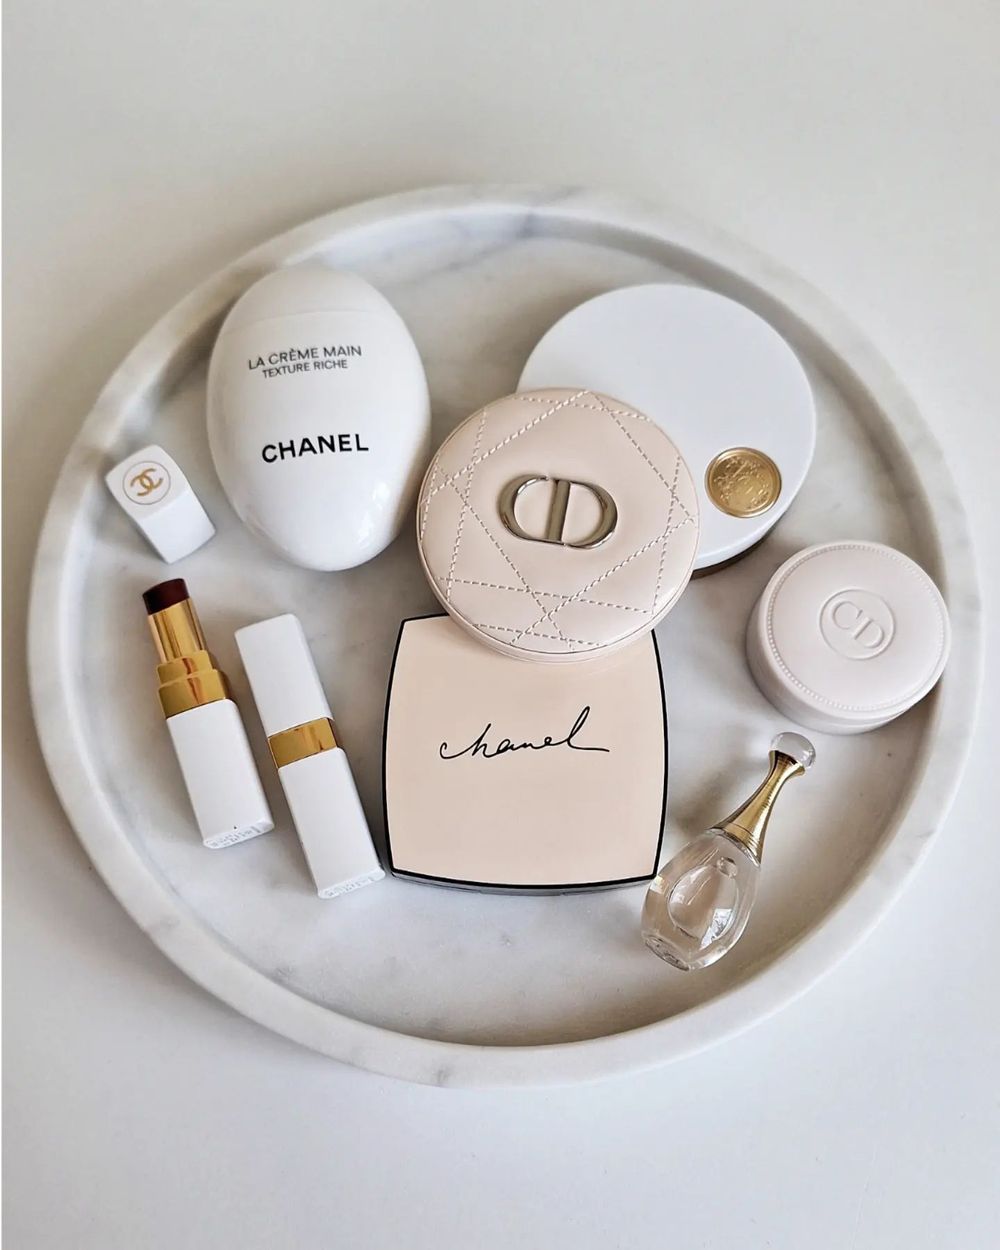 Chanel vs. Dior Beauty: Which Luxury Brand is Better? 2023